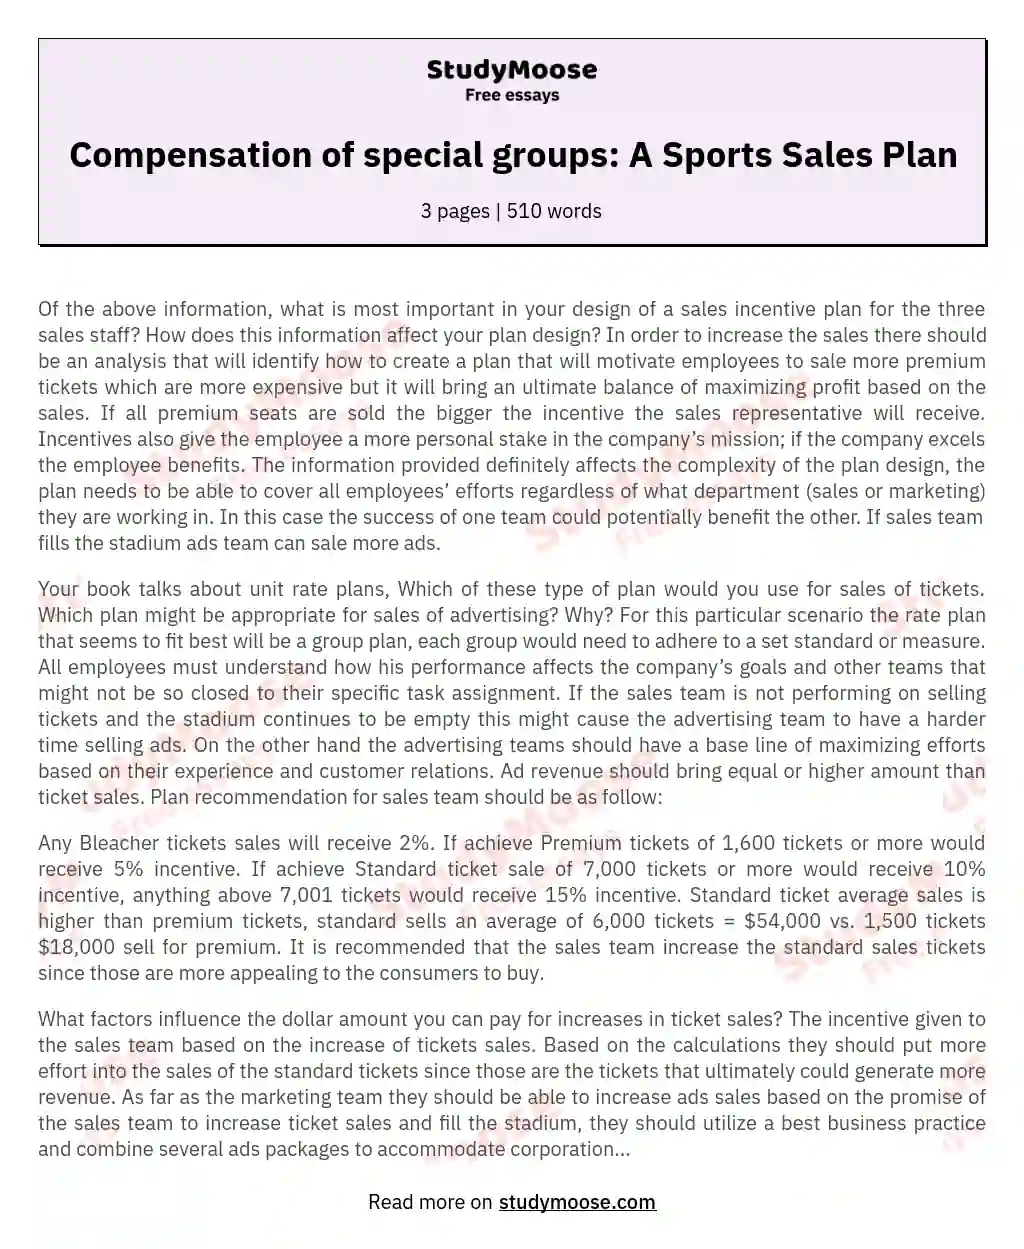 Compensation of special groups: A Sports Sales Plan